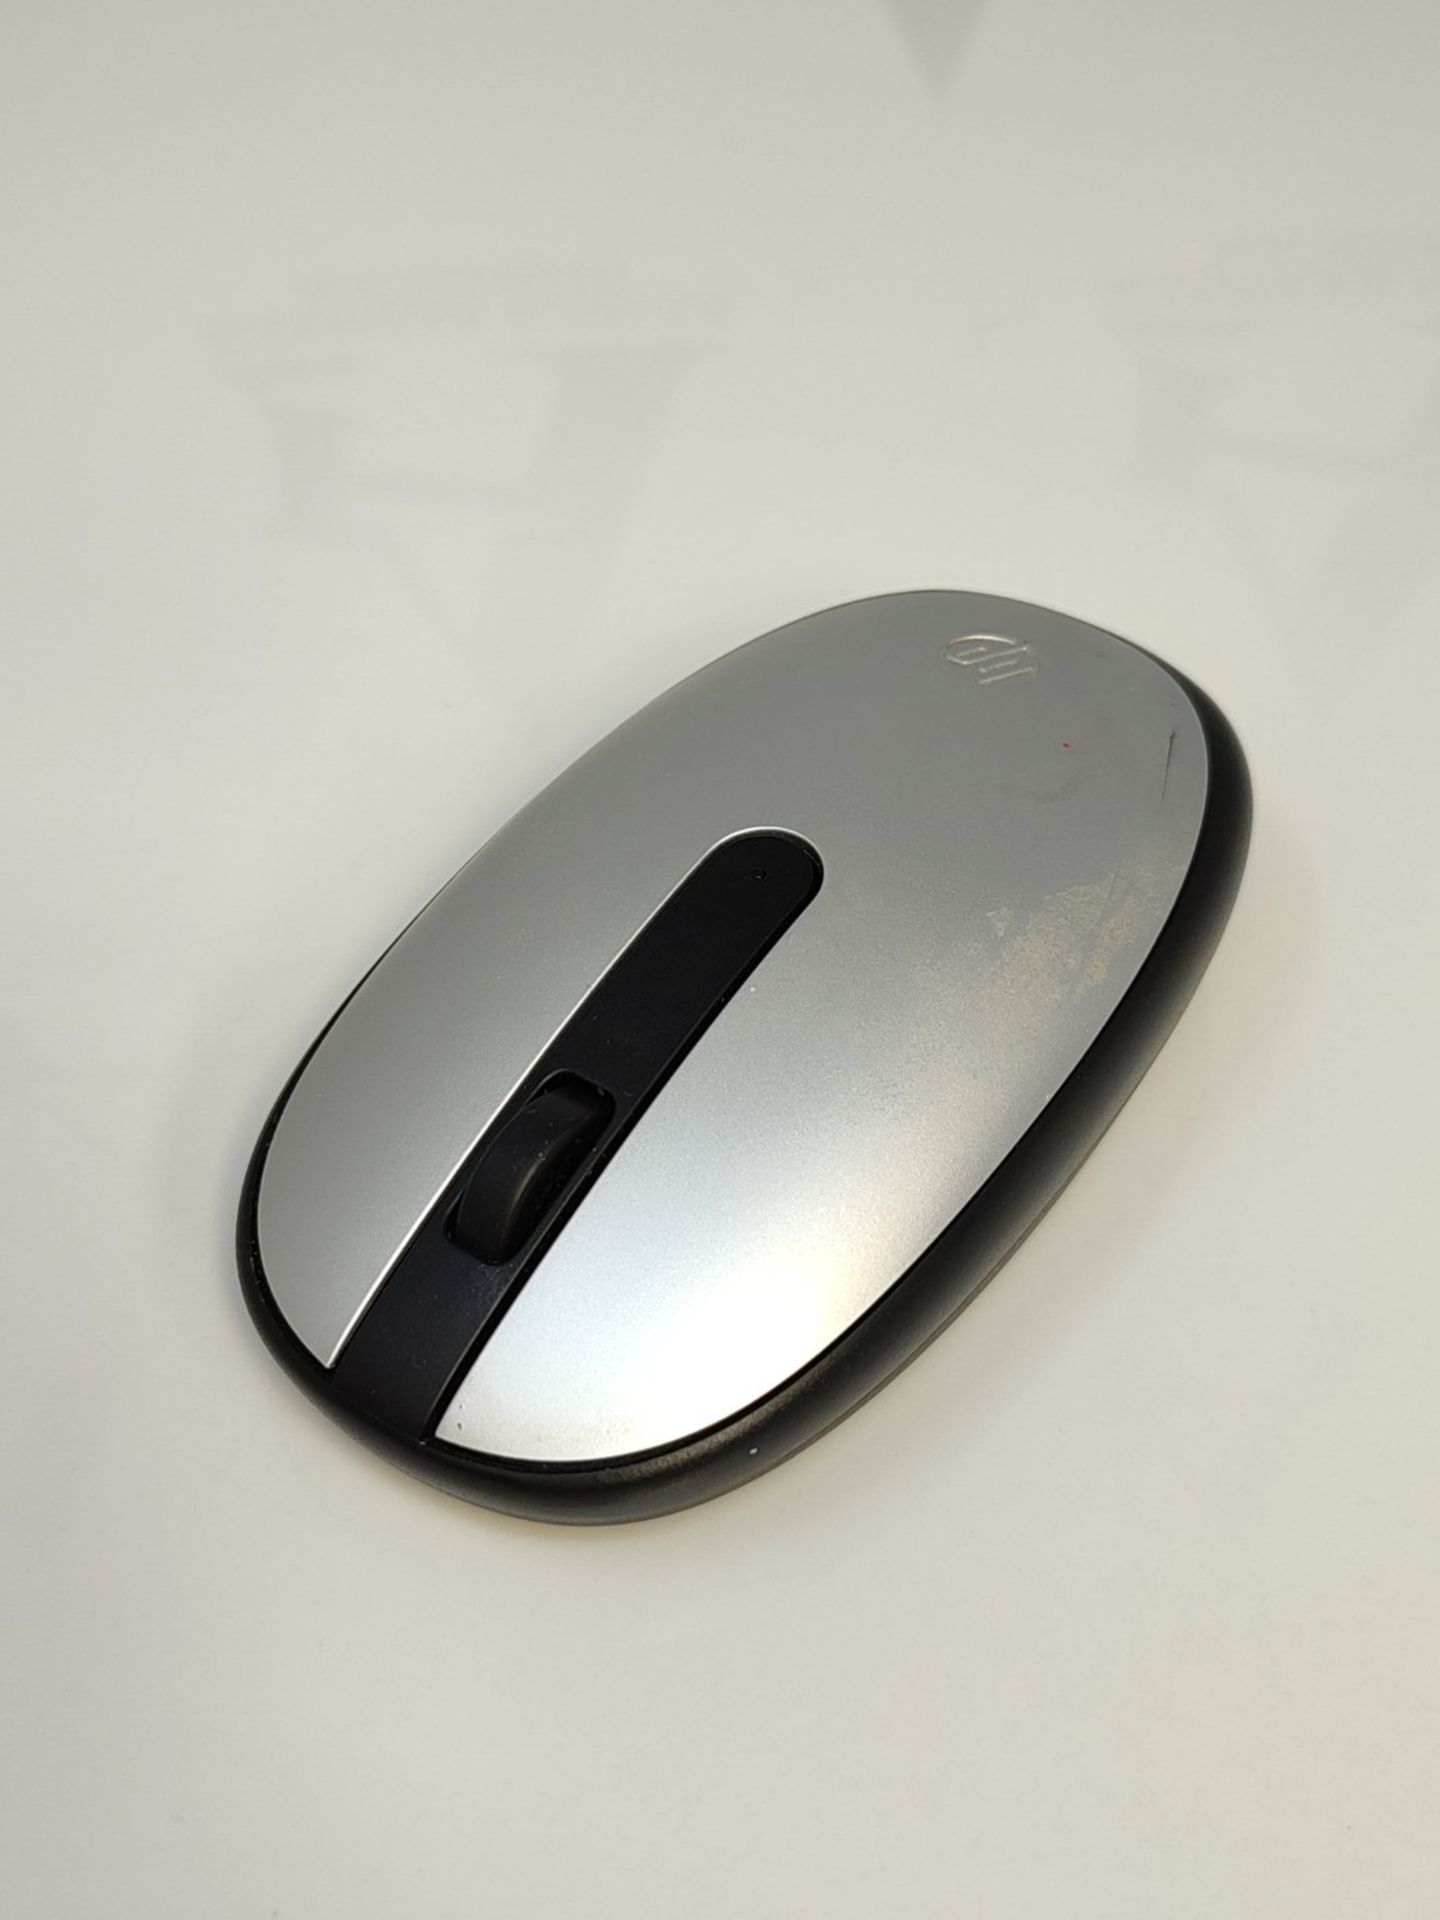 HP 240 Mouse Empire Wireless, 1600 DPI Optical Sensor, Bluetooth 5.1, 3 Buttons, Scrol - Image 2 of 2